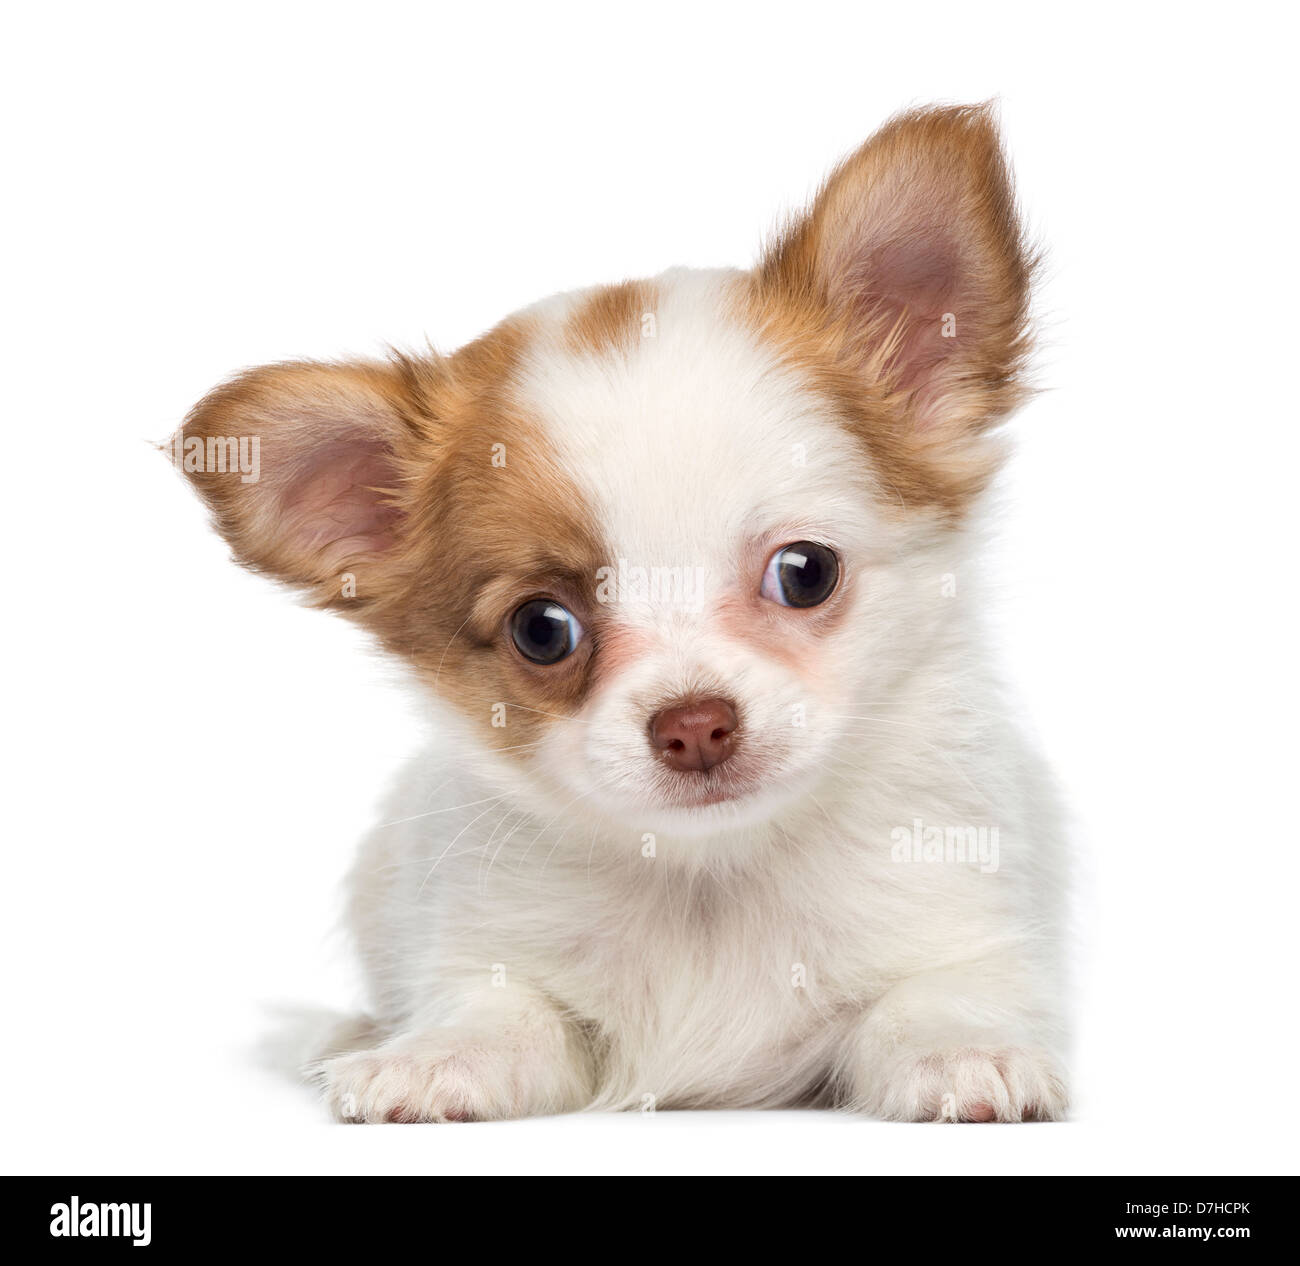 Chihuahua Puppy, 2 months old, lying against white background Stock Photo